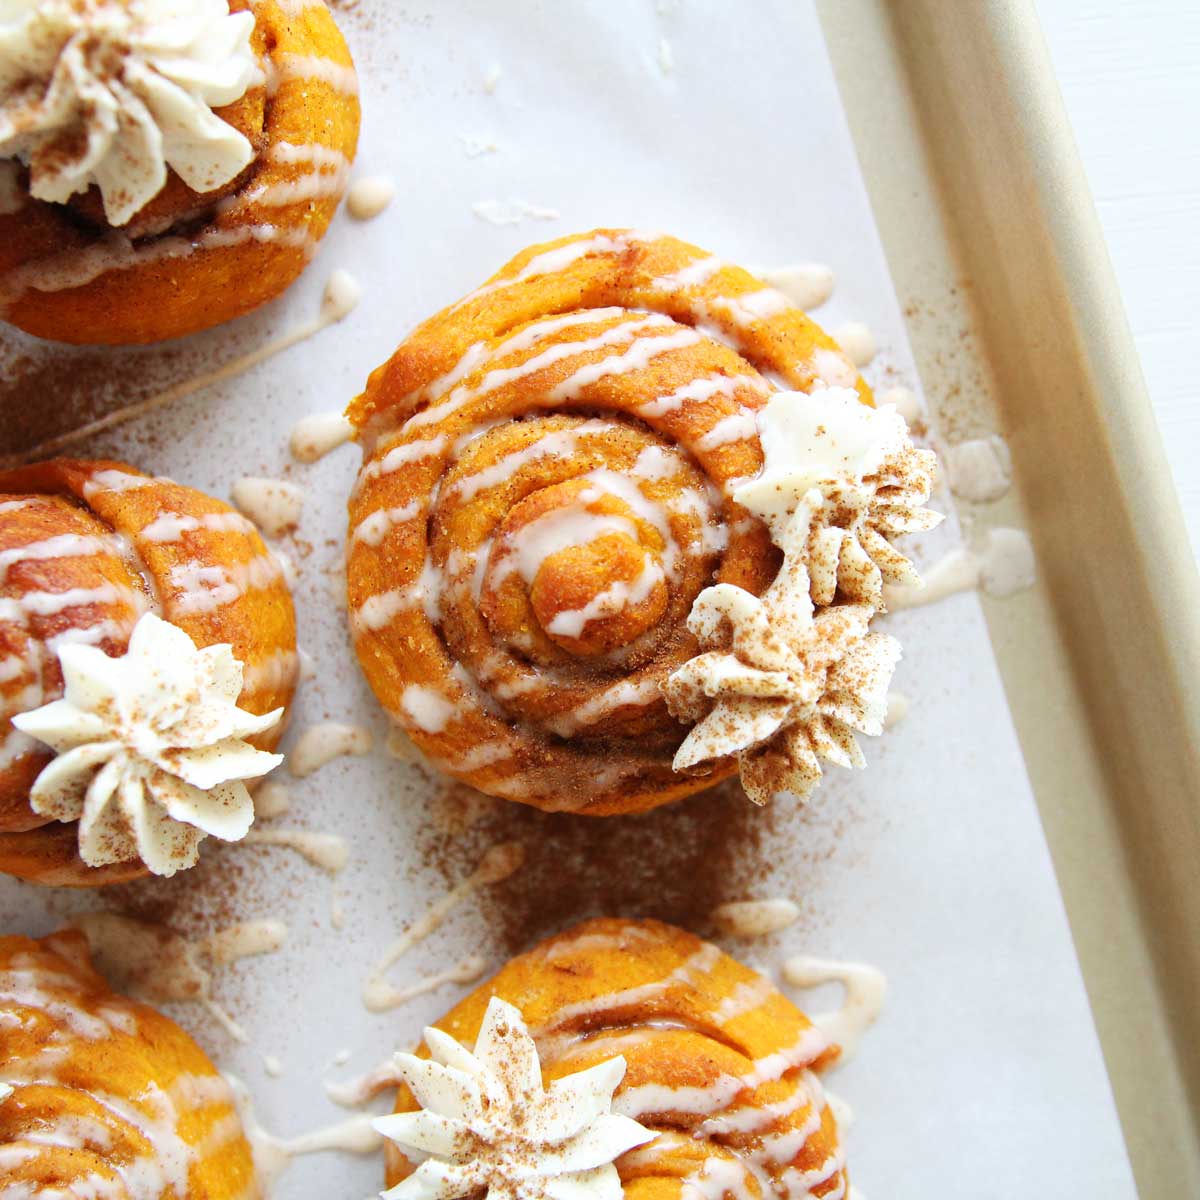 How to Make Healthy Pumpkin Cinnamon Rolls with Added Almond Flour - Pumpkin Chocolate Frosting